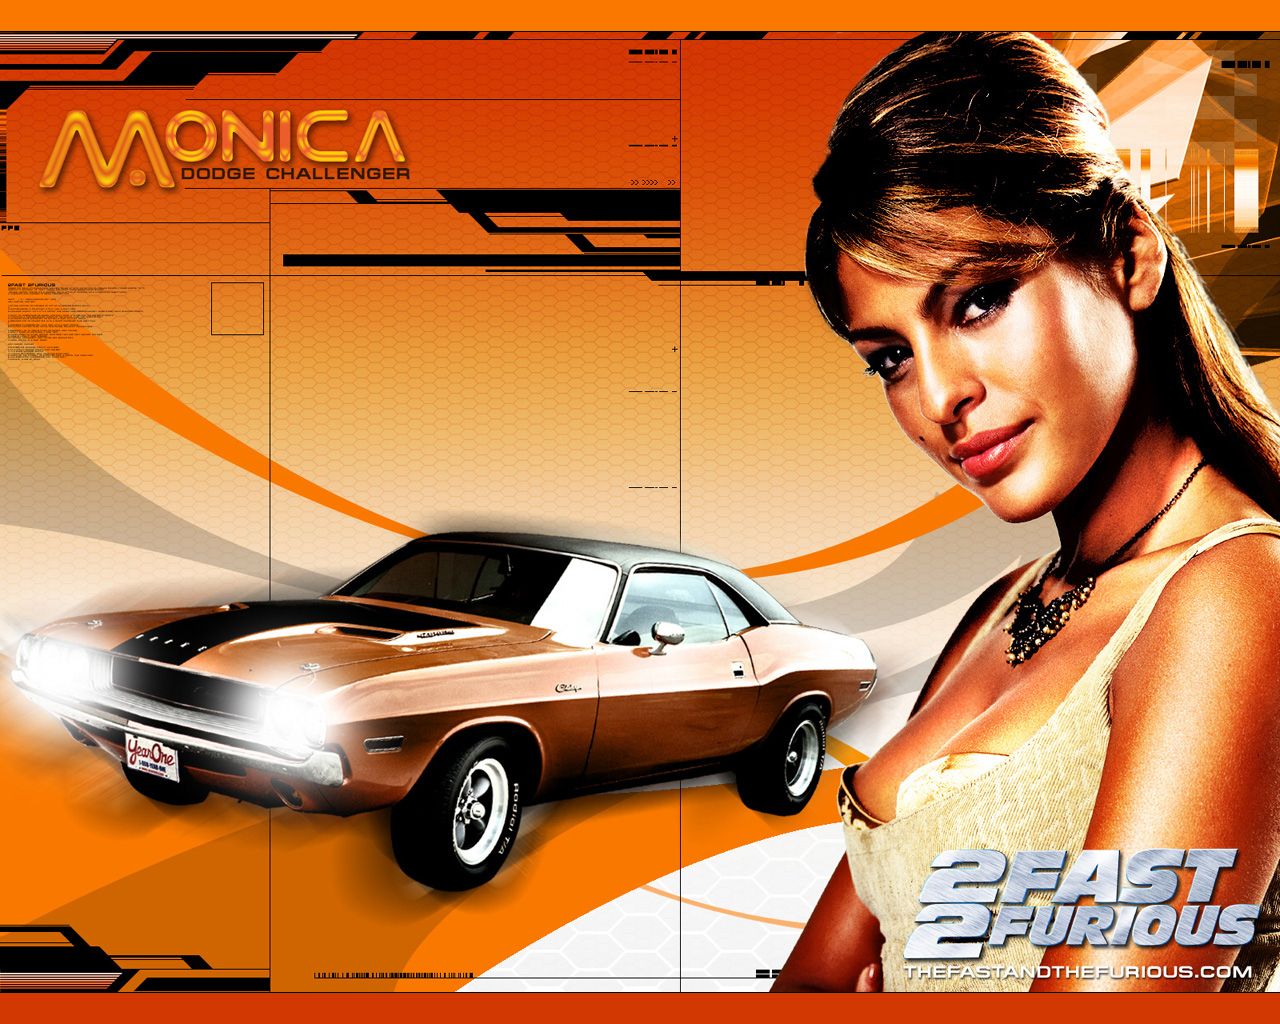 Desktop Wallpaper 2 Fast 2 Furious The Fast and the Furious Movies